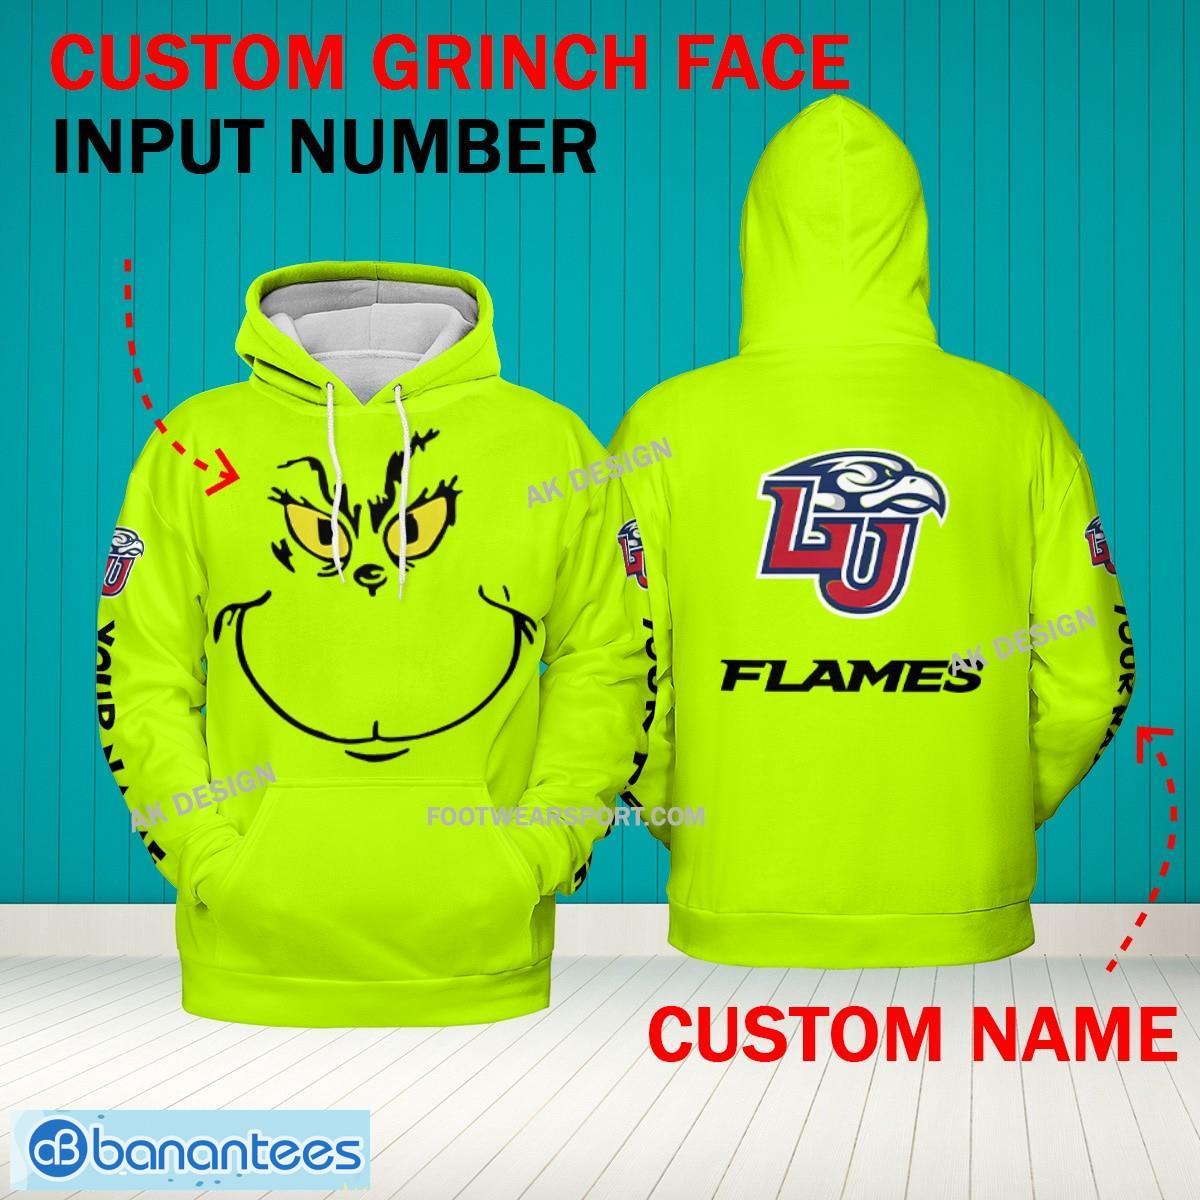 Grinch Face Liberty Flames 3D Hoodie, Zip Hoodie, Sweater Green AOP Custom Number And Name - Grinch Face NCAA Liberty Flames 3D Hoodie